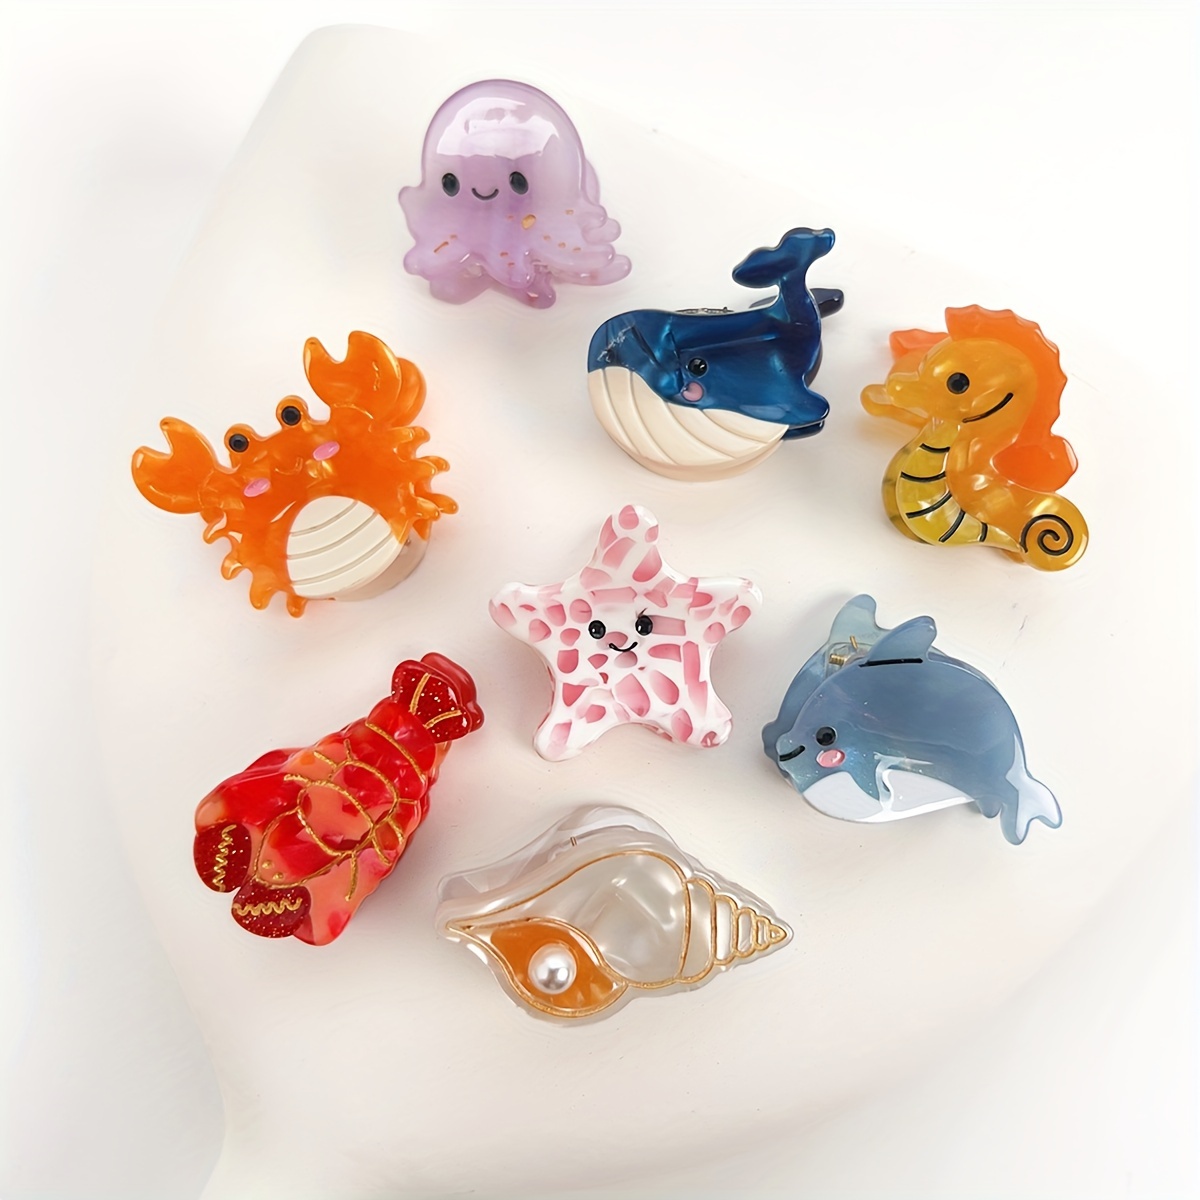 

8pcs Mixed Set Of Delicate Oceanic Acetate Hair Clips - Sea Snail, Dolphin, Starfish, And Side Hair Clips For Women - Cute, Sweet, Animal, Cartoon, Small, Ages 14+, Set, Multi-color Print, Easter